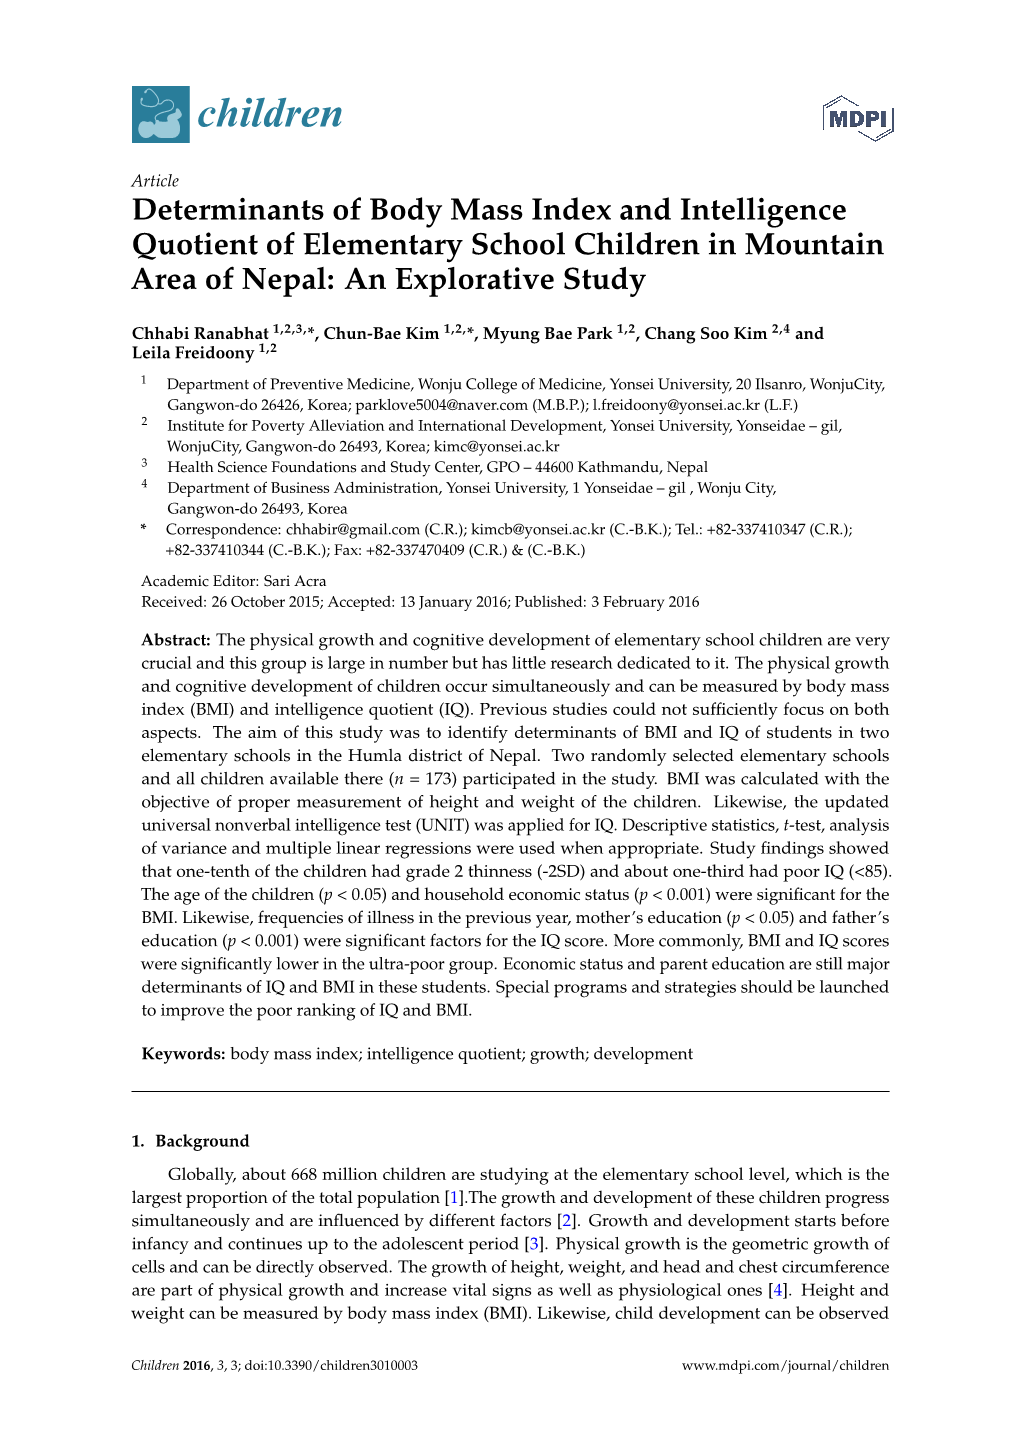 Determinants of Body Mass Index and Intelligence Quotient of Elementary School Children in Mountain Area of Nepal: an Explorative Study